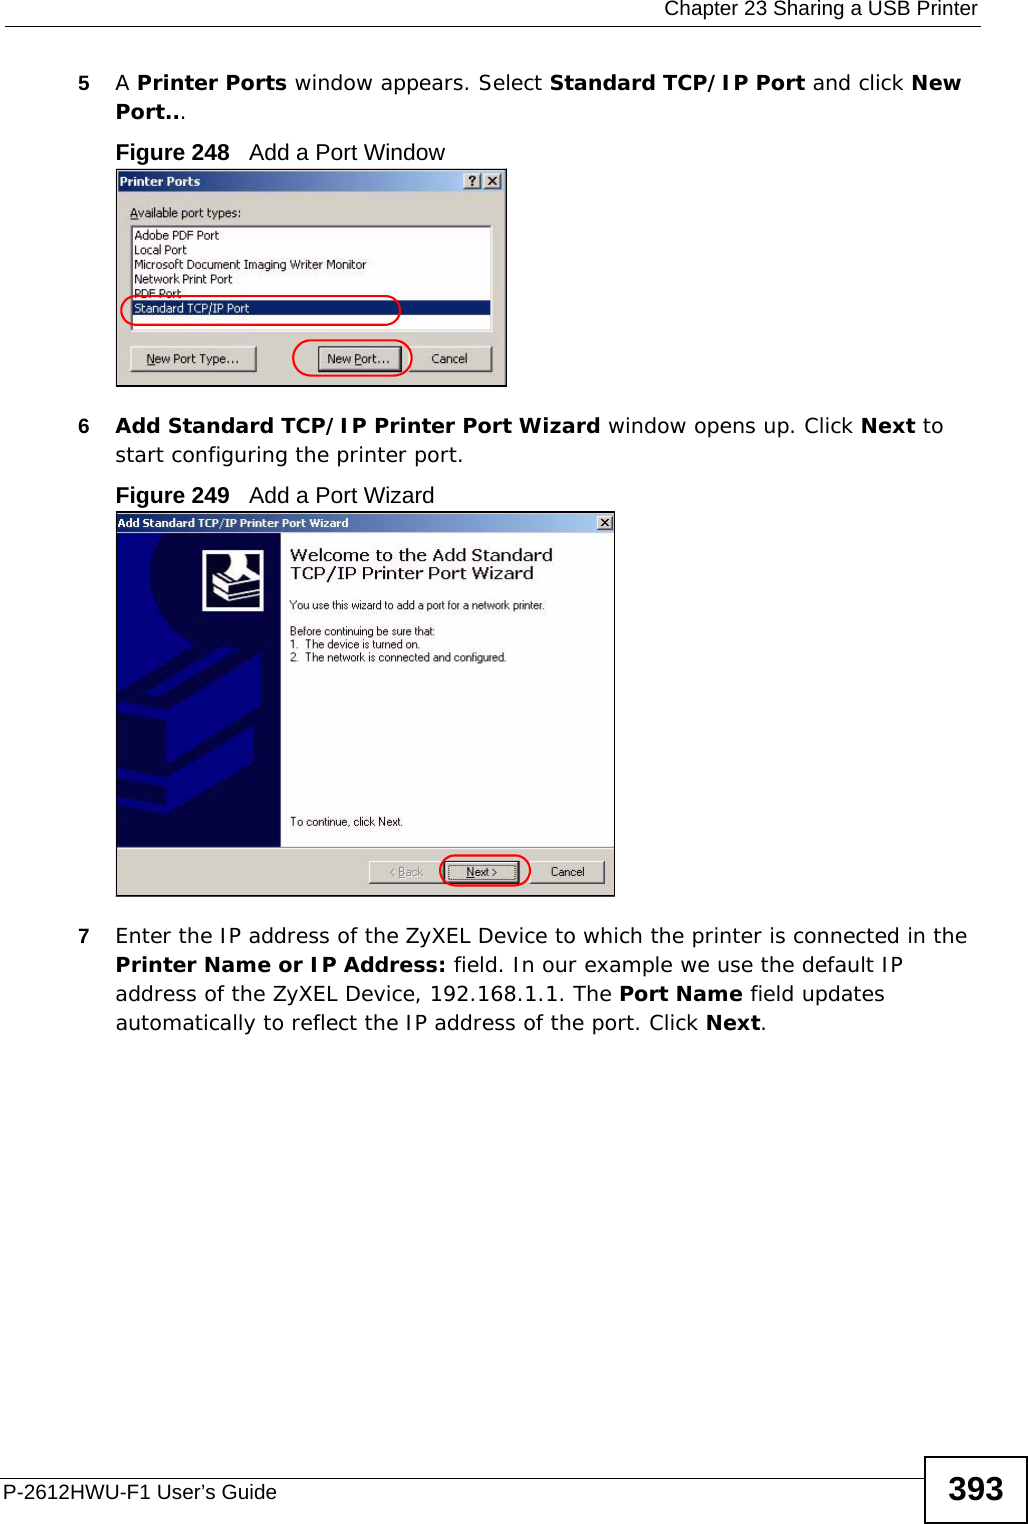  Chapter 23 Sharing a USB PrinterP-2612HWU-F1 User’s Guide 3935A Printer Ports window appears. Select Standard TCP/IP Port and click New Port...Figure 248   Add a Port Window6Add Standard TCP/IP Printer Port Wizard window opens up. Click Next to start configuring the printer port.Figure 249   Add a Port Wizard7Enter the IP address of the ZyXEL Device to which the printer is connected in the Printer Name or IP Address: field. In our example we use the default IP address of the ZyXEL Device, 192.168.1.1. The Port Name field updates automatically to reflect the IP address of the port. Click Next.